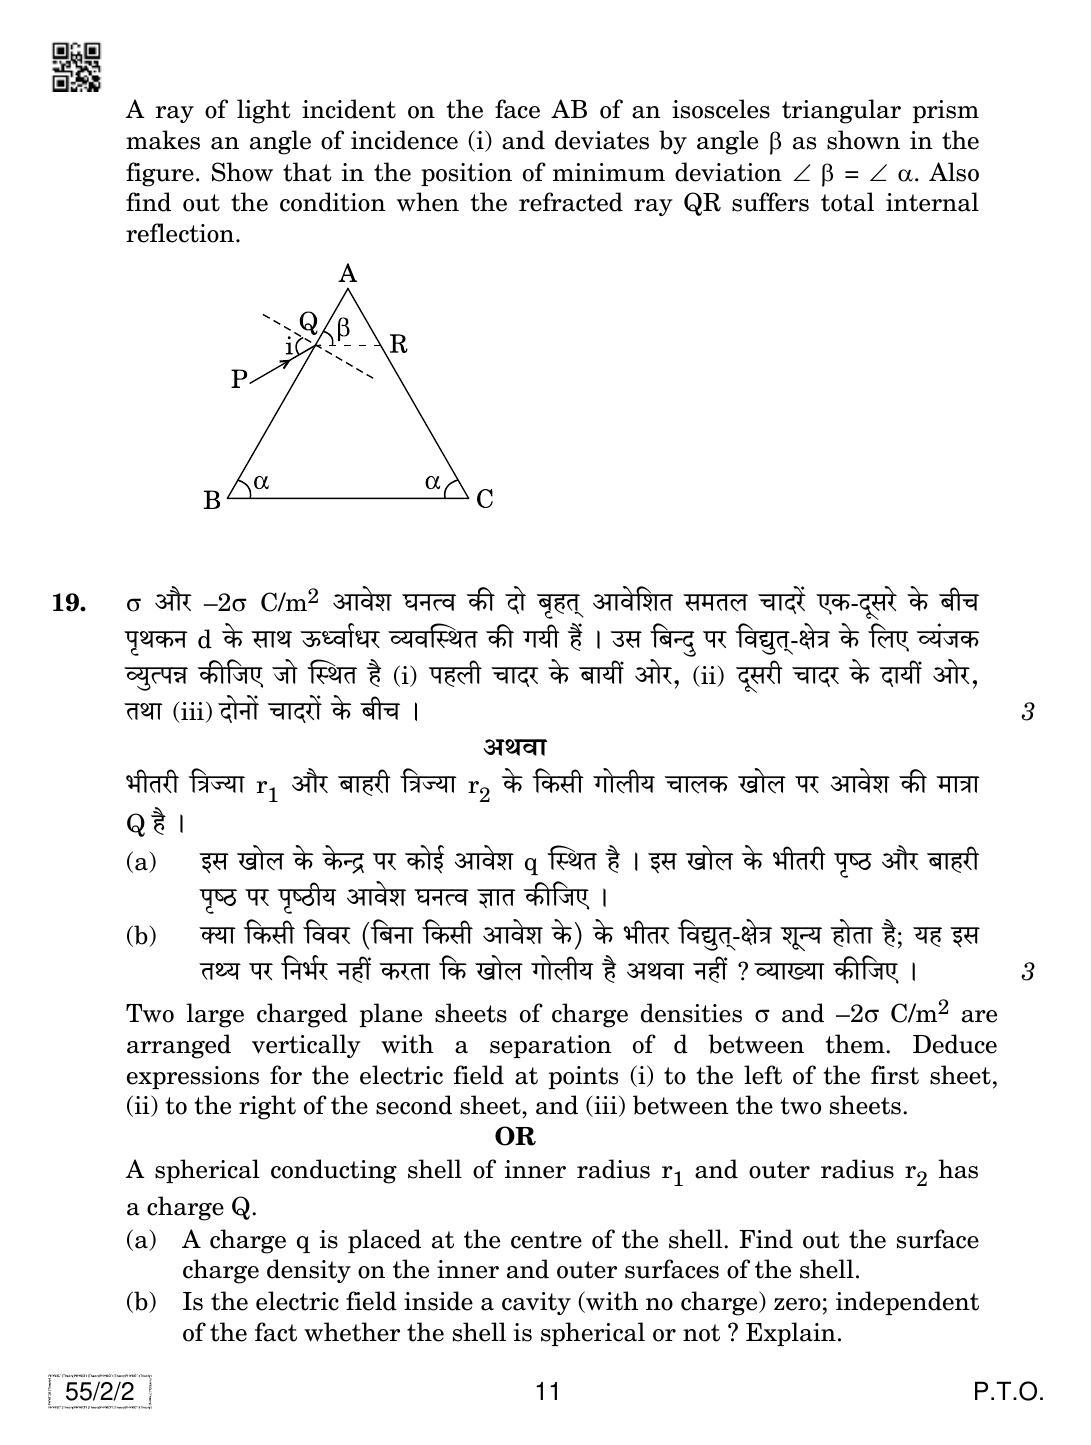 CBSE Class 12 55-2-2 Physics 2019 Question Paper - Page 11